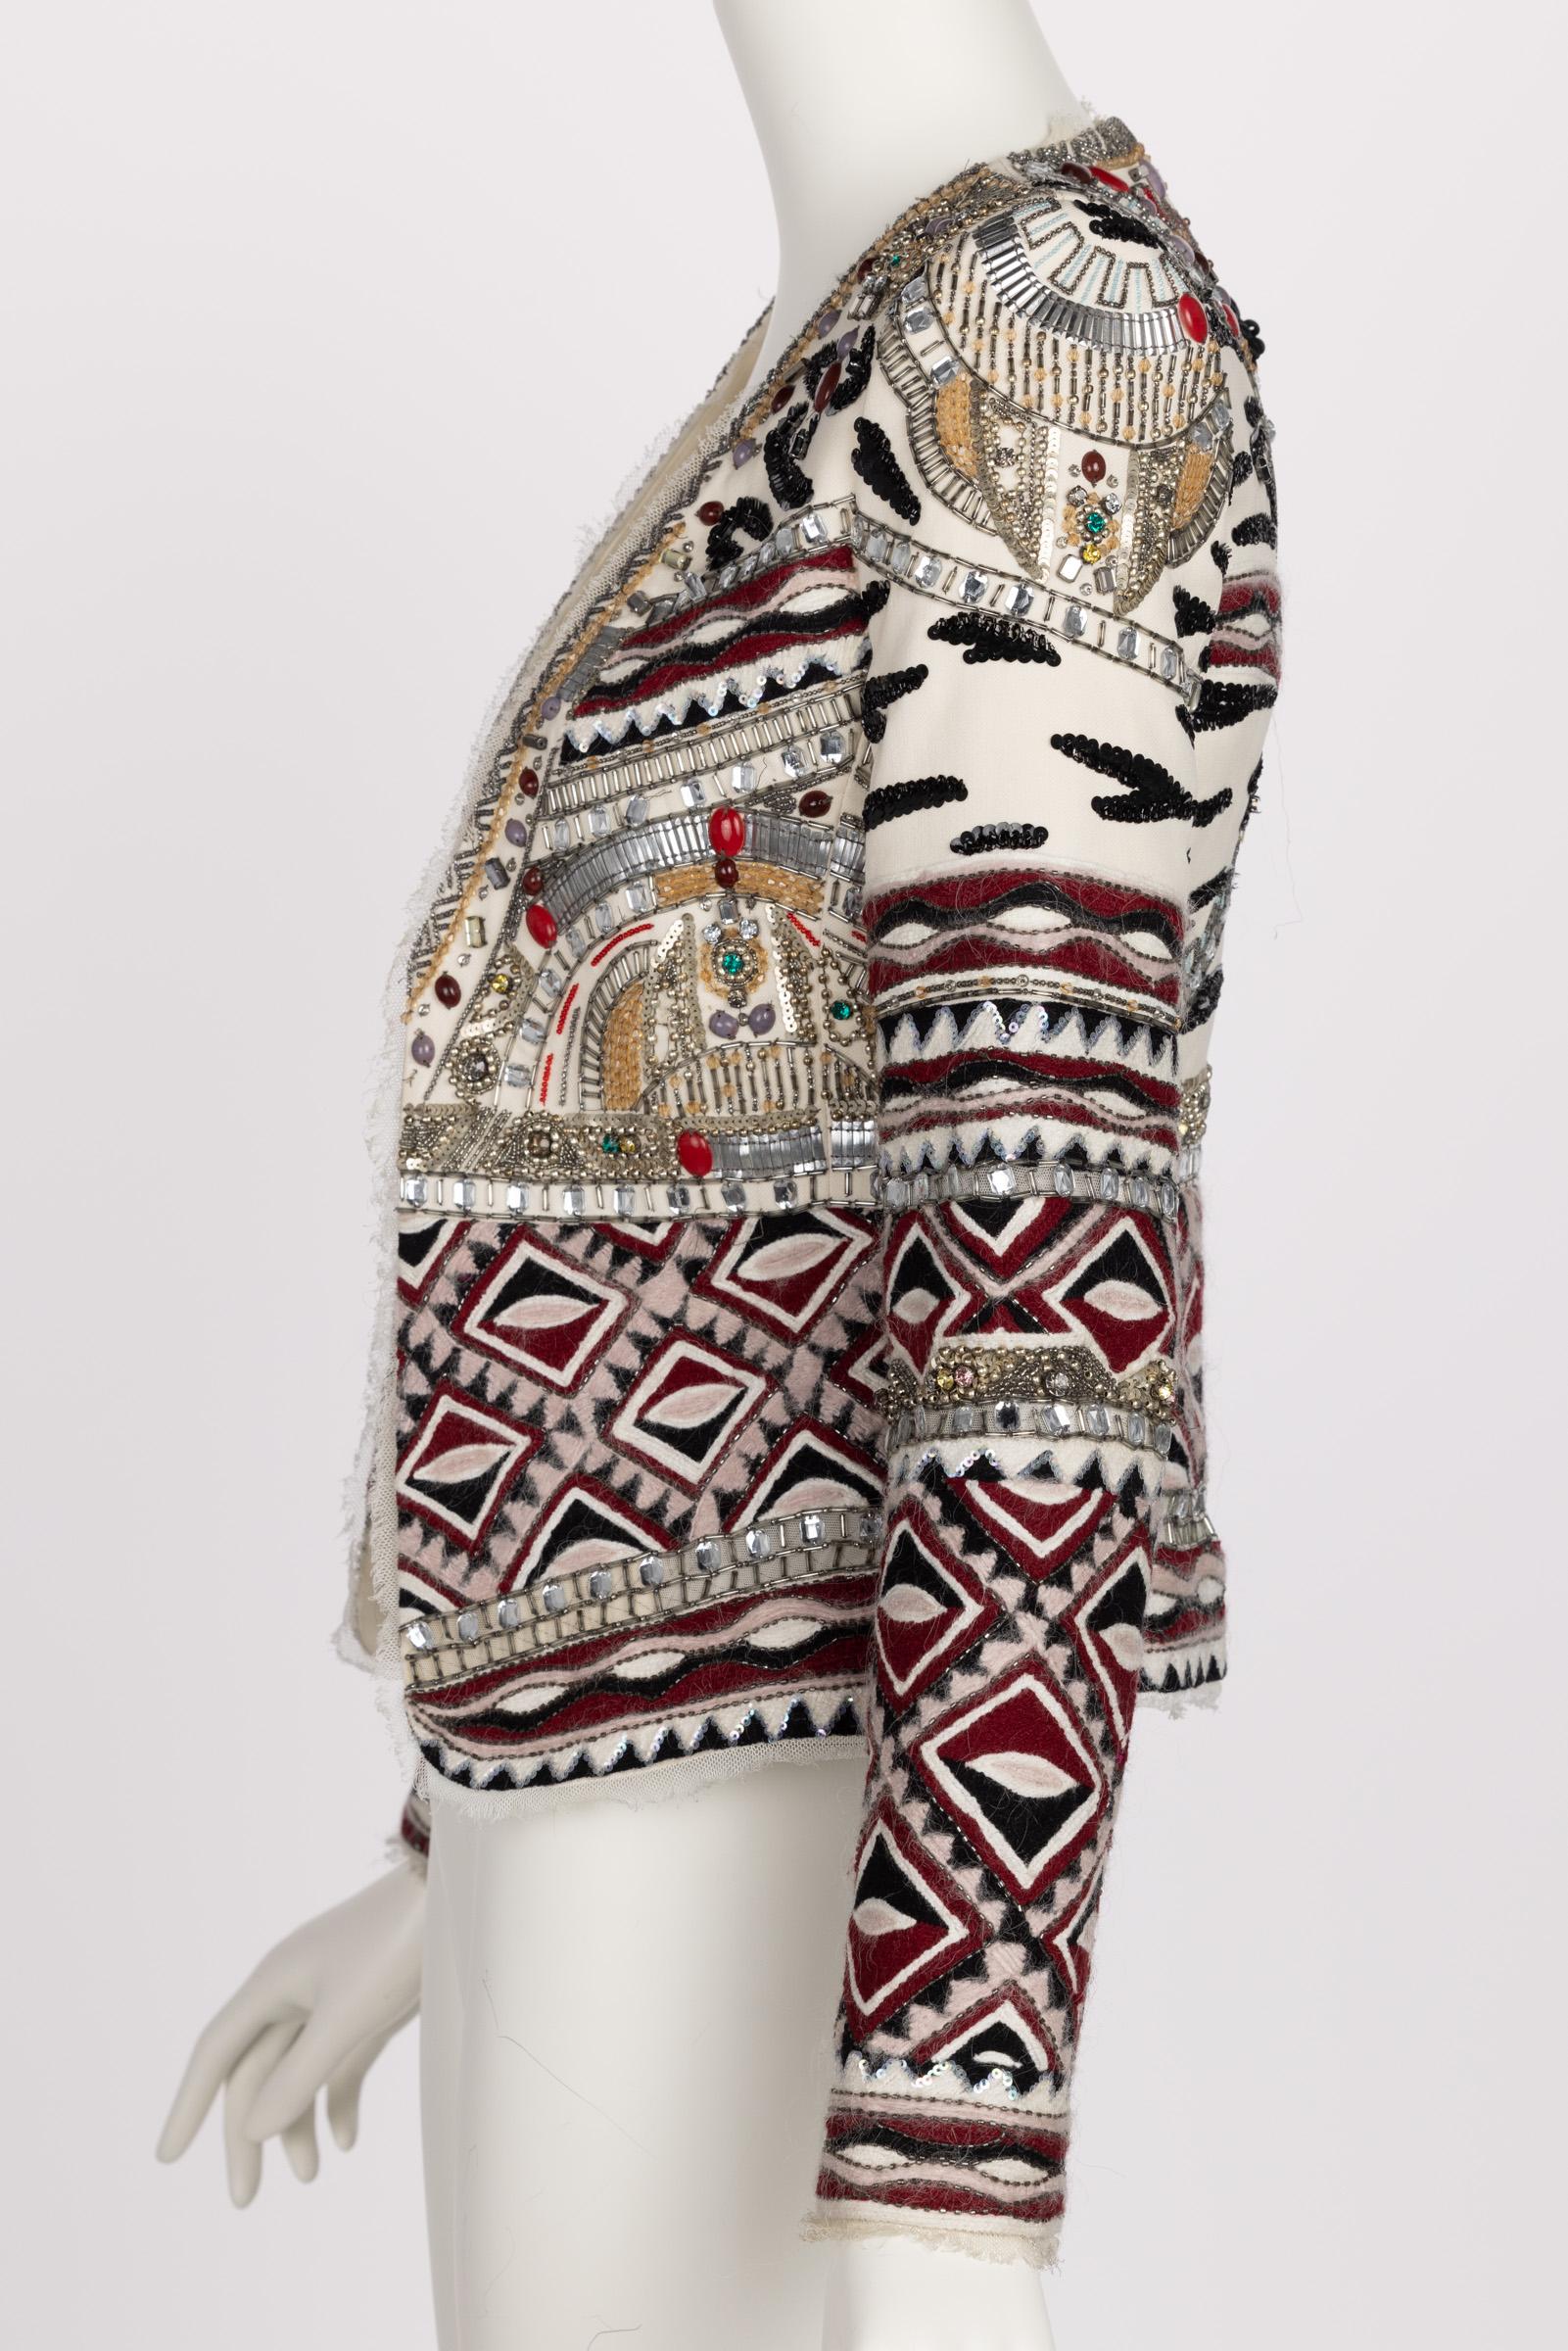 Gray  Emilio Pucci Embellished Wool Silk & Cotton Blend Jacket, Pre -Fall 2012 Runway